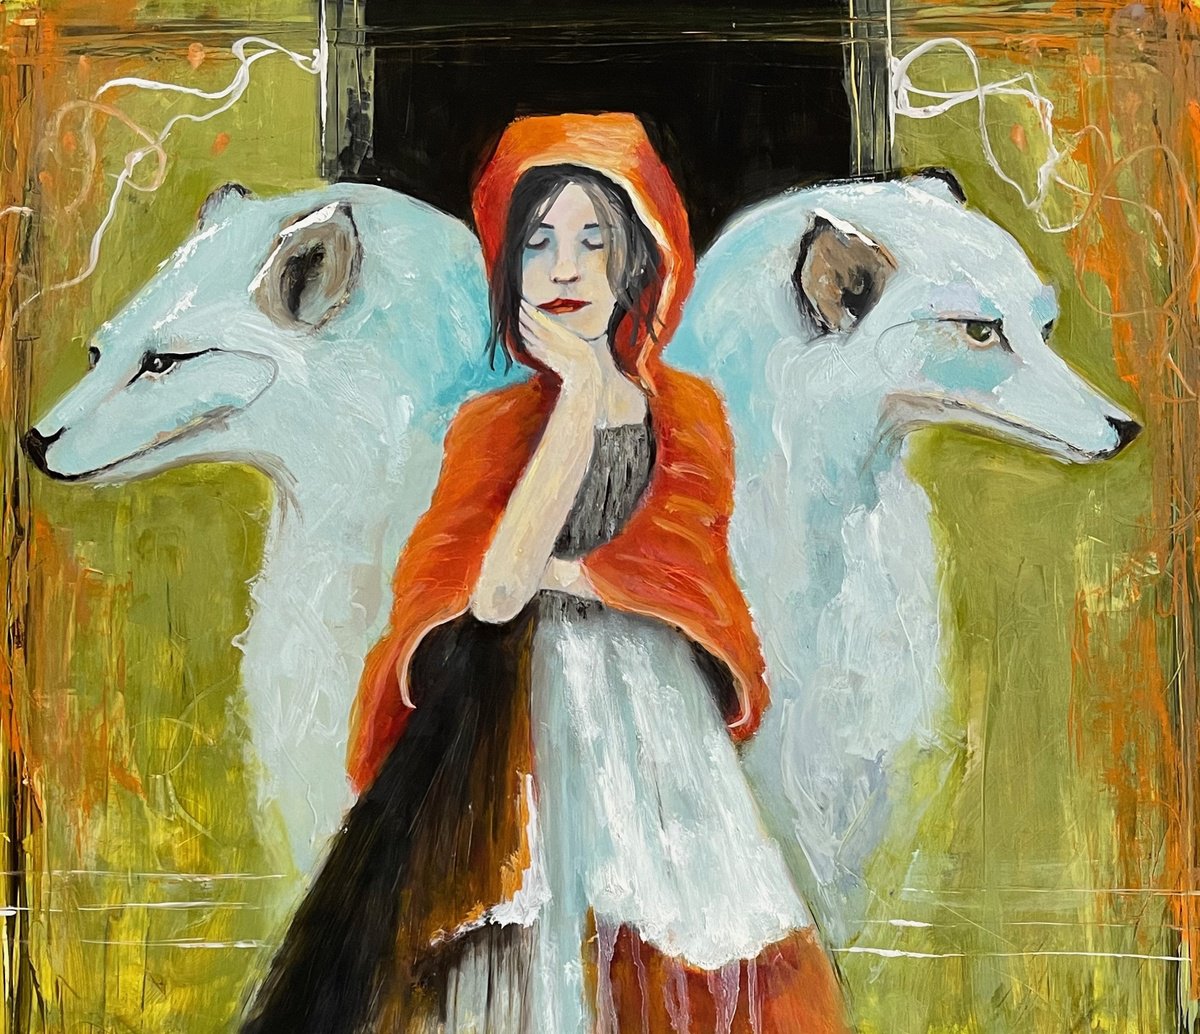 Le Petit Chaperon Rouge (Little Red Riding Hood) by Lola Jovan